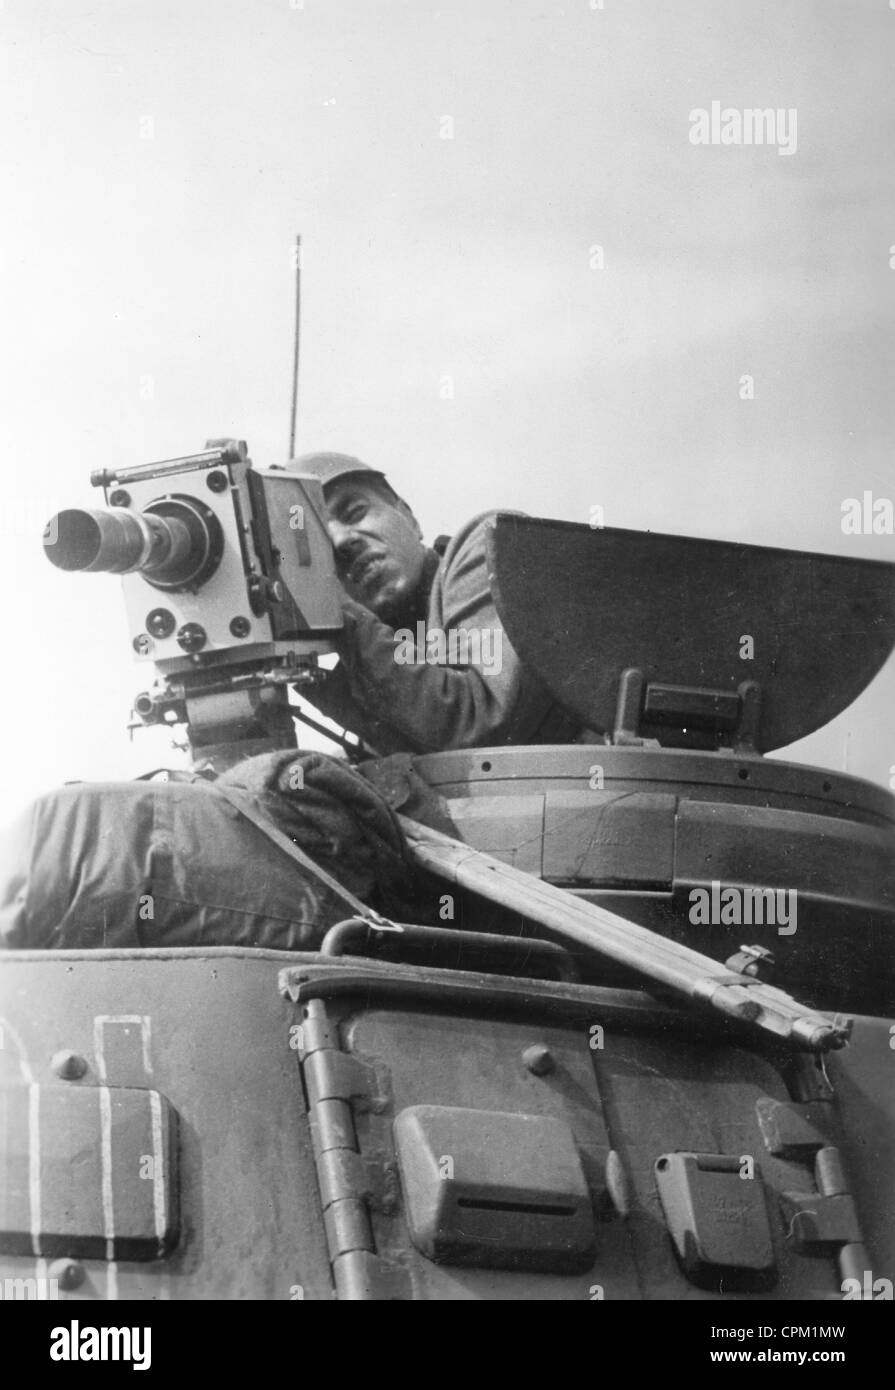 A German cameraman shoots from a tank turret on the Eastern front, 1942 Stock Photo